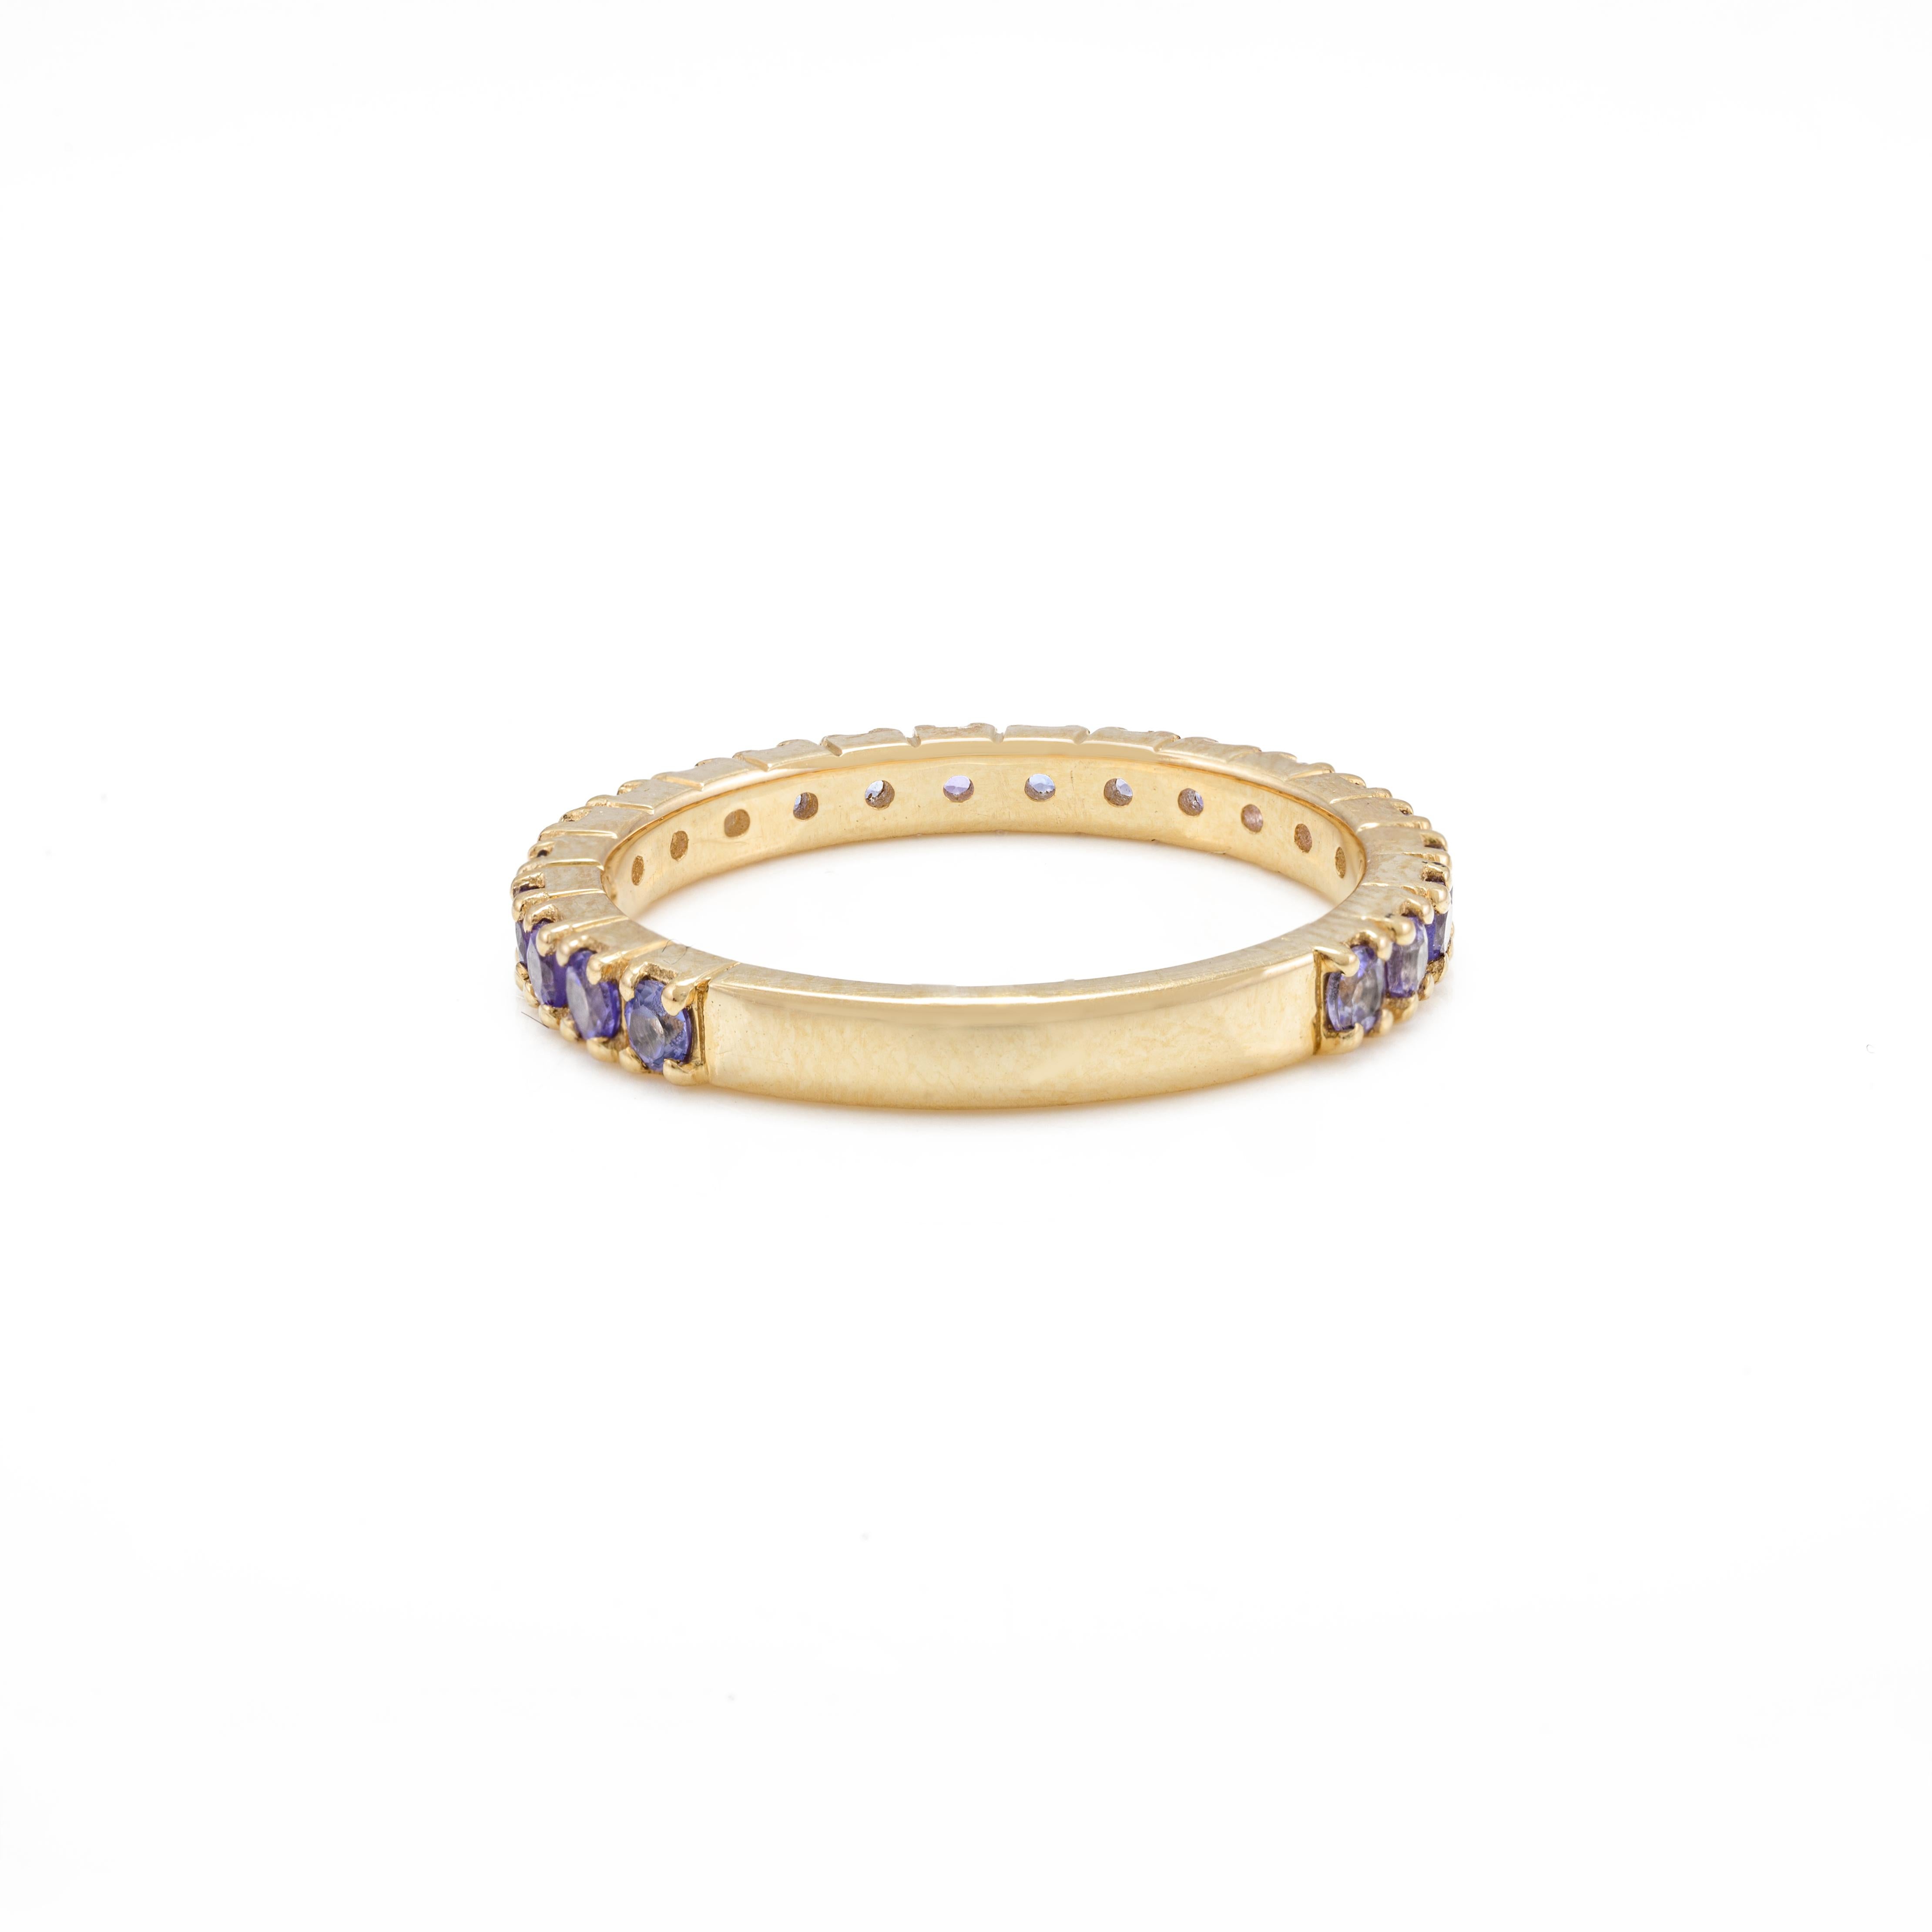 For Sale:  Genuine Round Cut Tanzanite Full Eternity Band Ring 14k Solid Yellow Gold 7